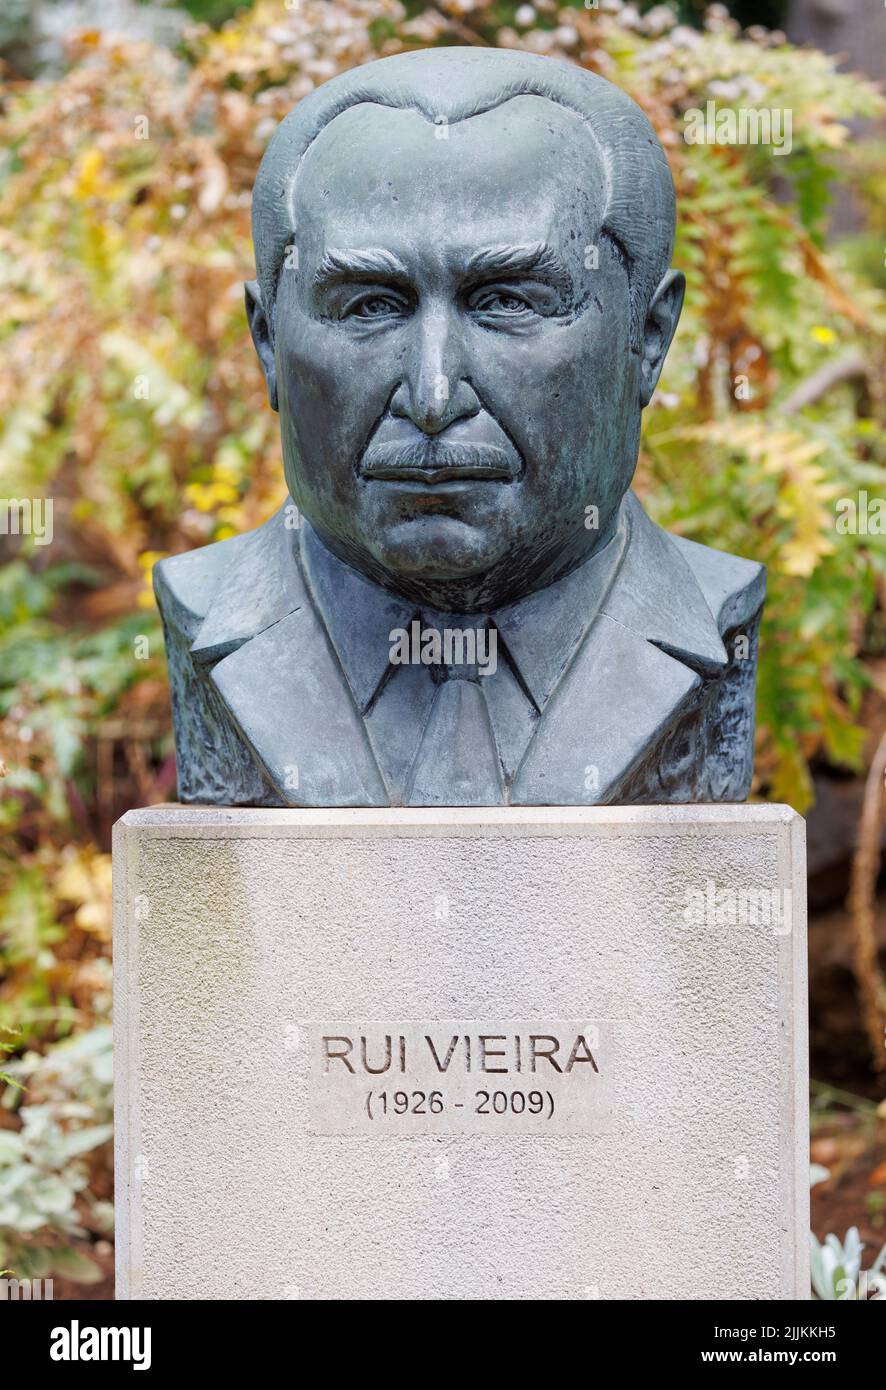 Bust of Rui Vieira, founder of the Botanical Gardens in Funchal, Madeira. Stock Photo